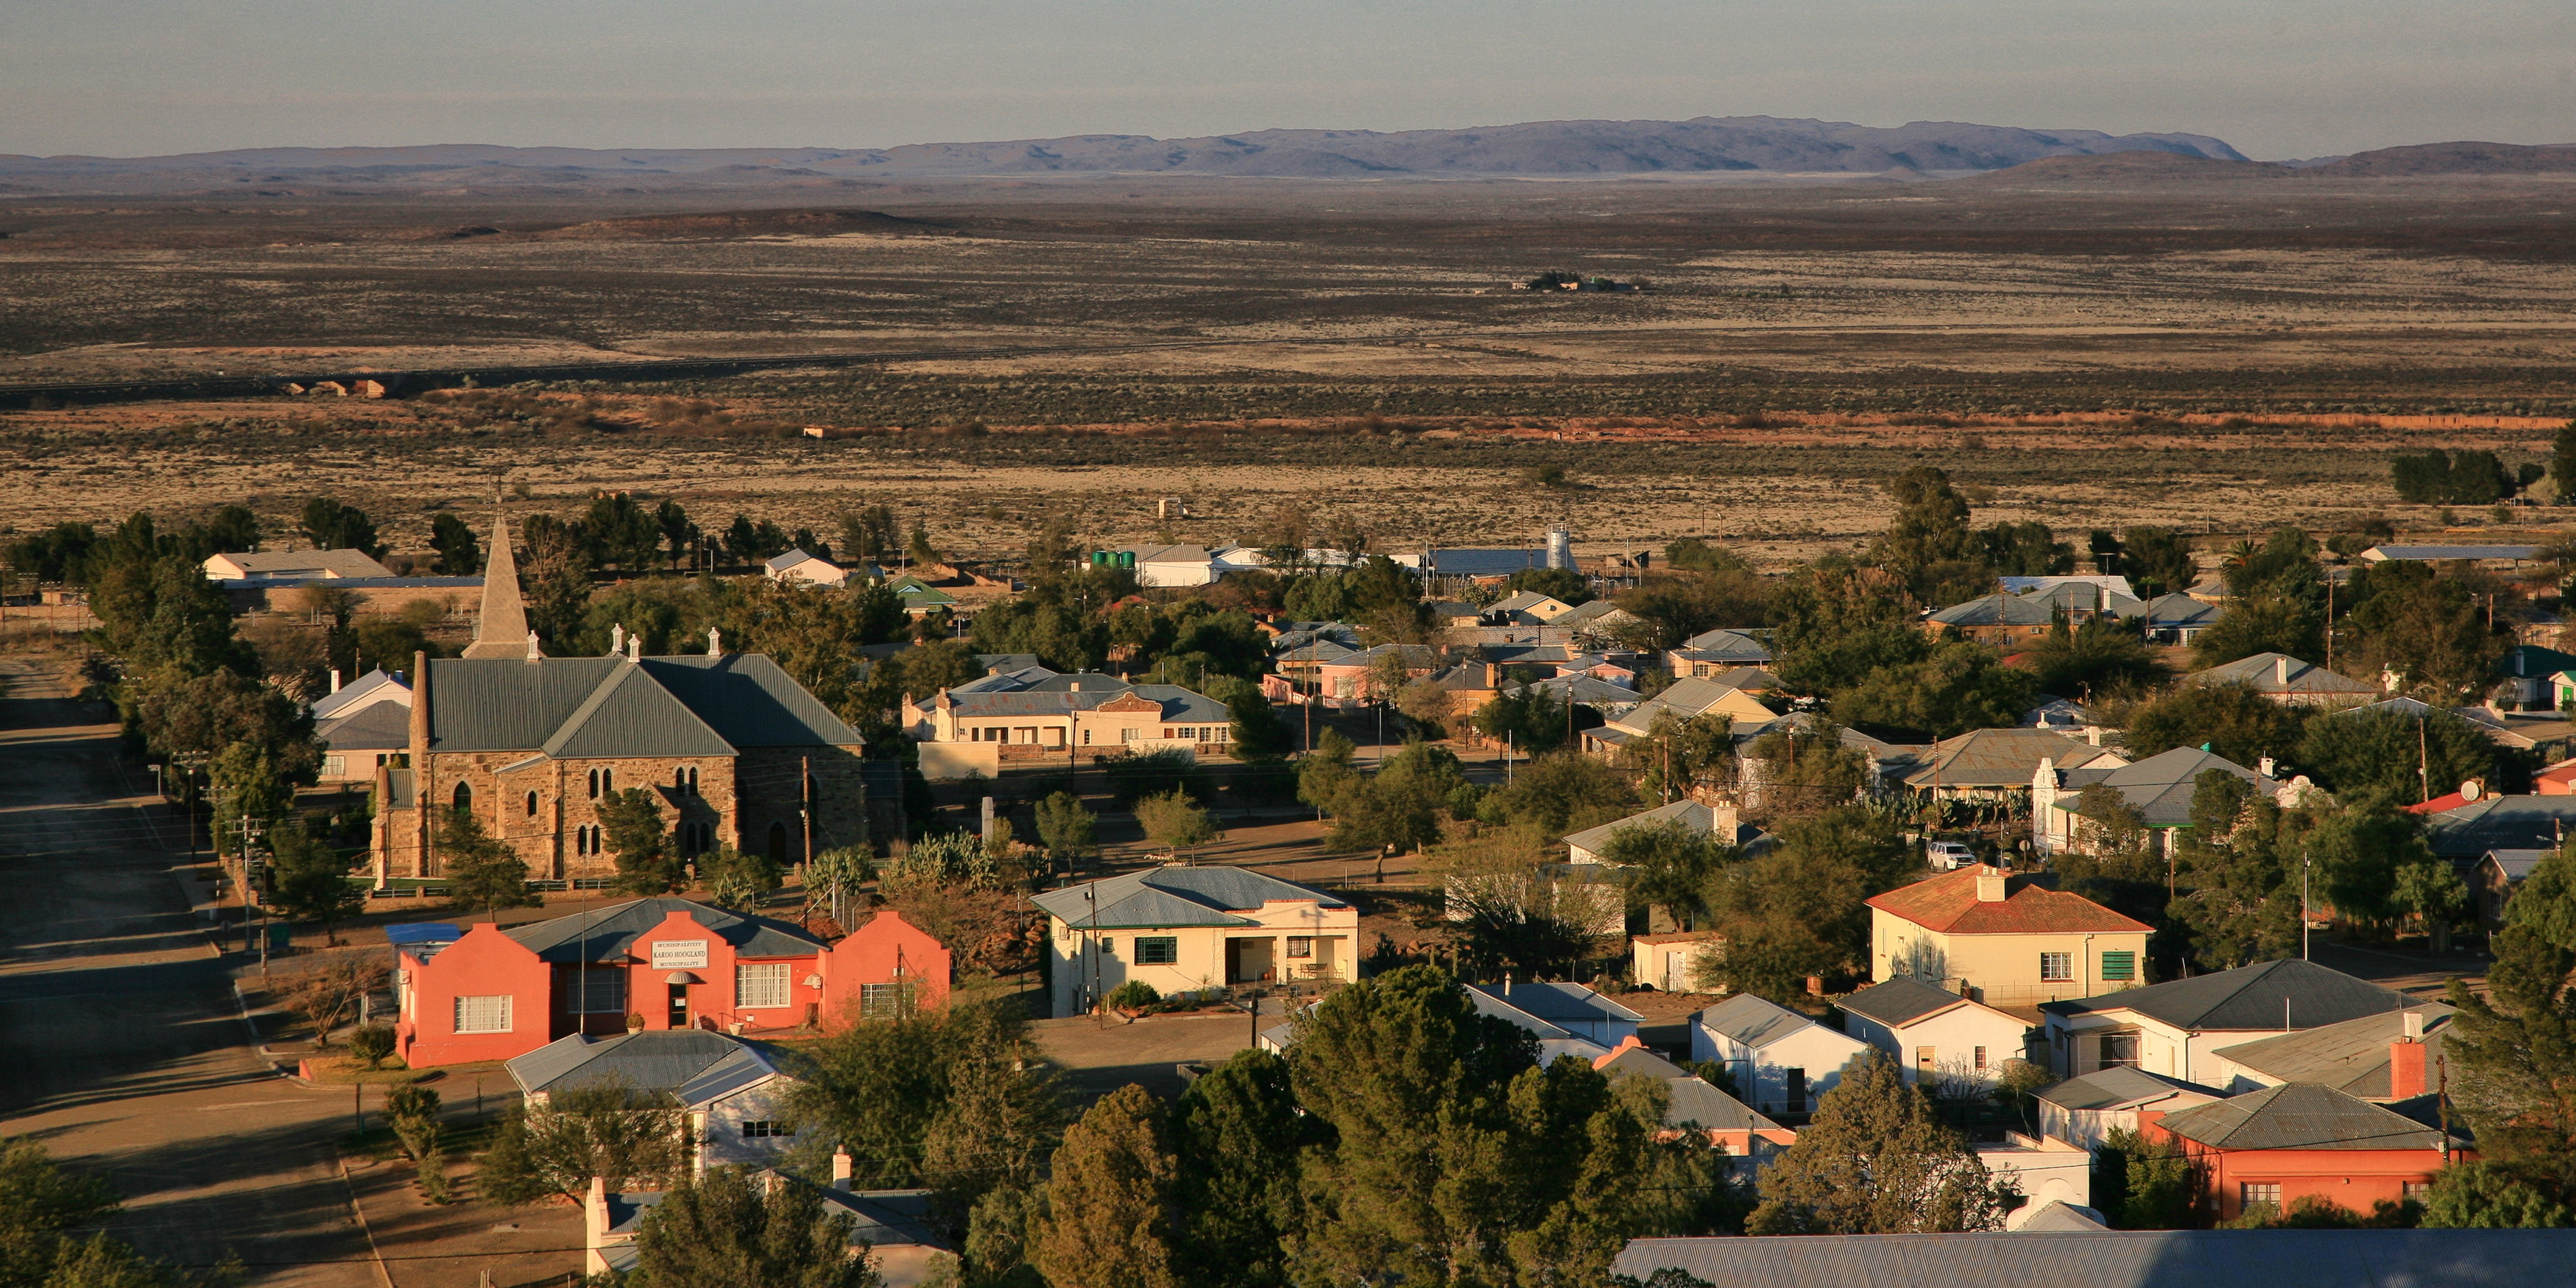 The Upper Karoo town of Williston waking up to a new day. Image: Chris Marais